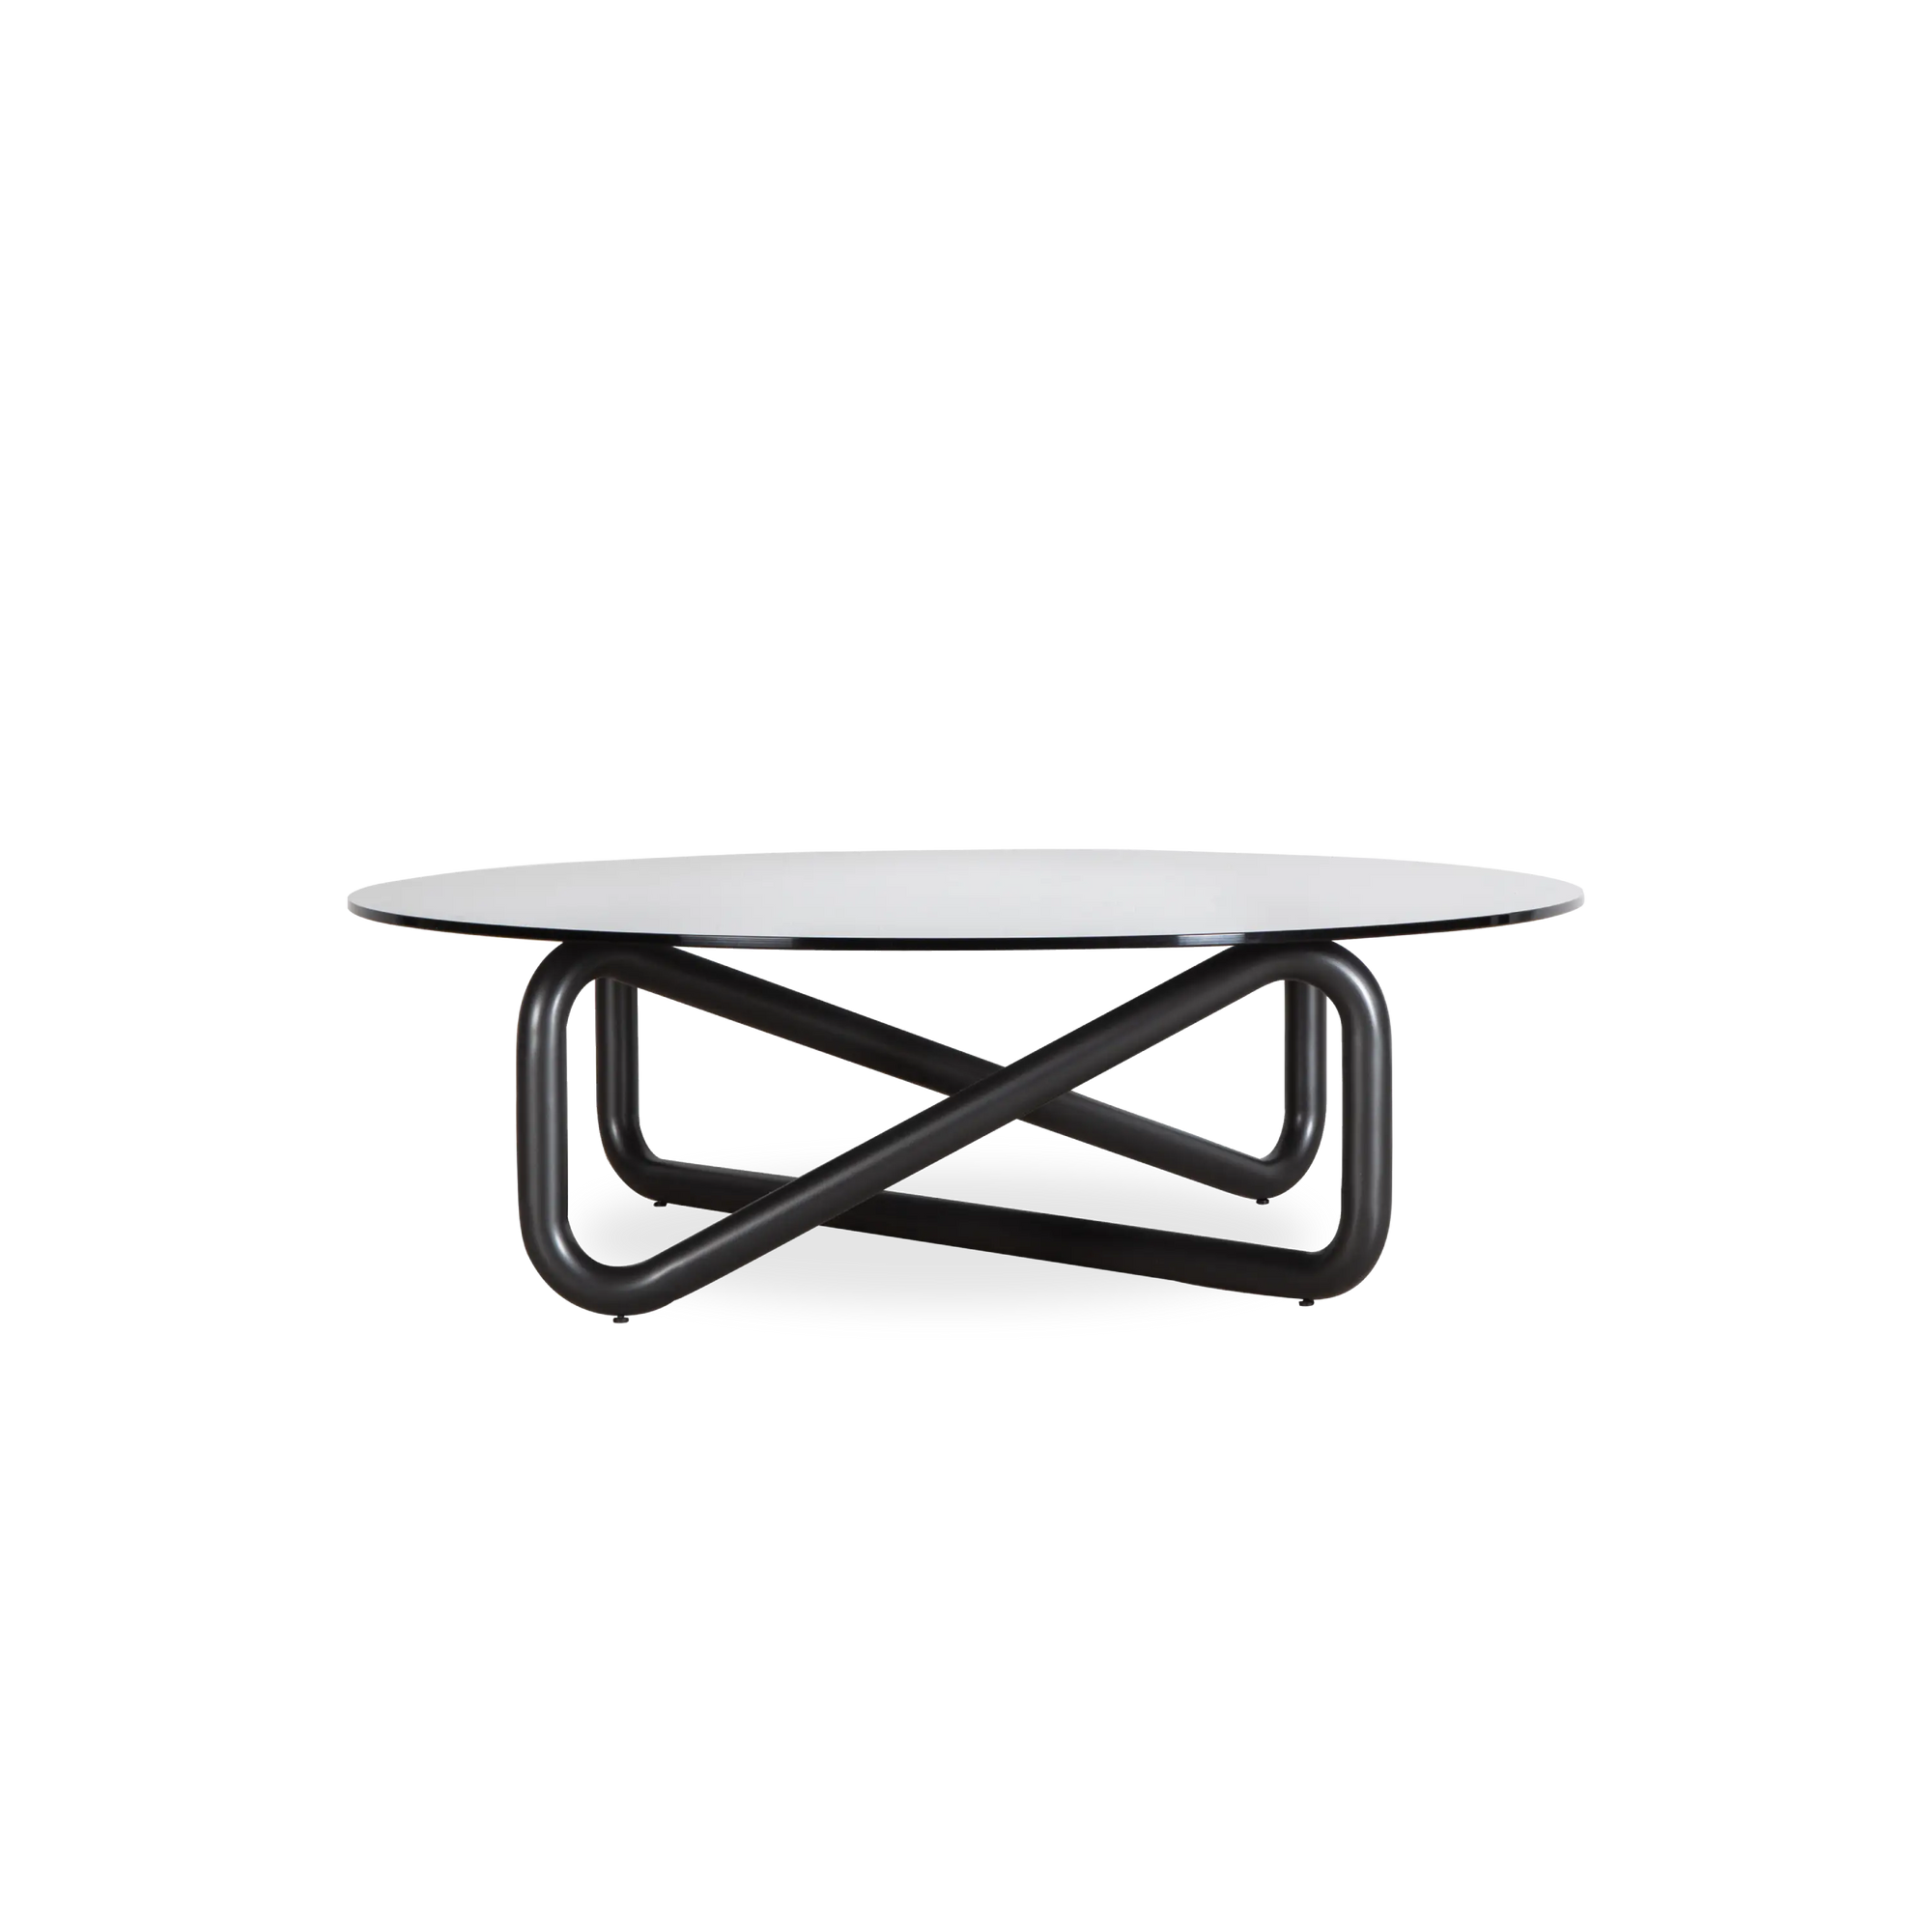 Inspired by the mathematical symbol of eternity, the Infinity Coffee Table embodies the infinite loop.